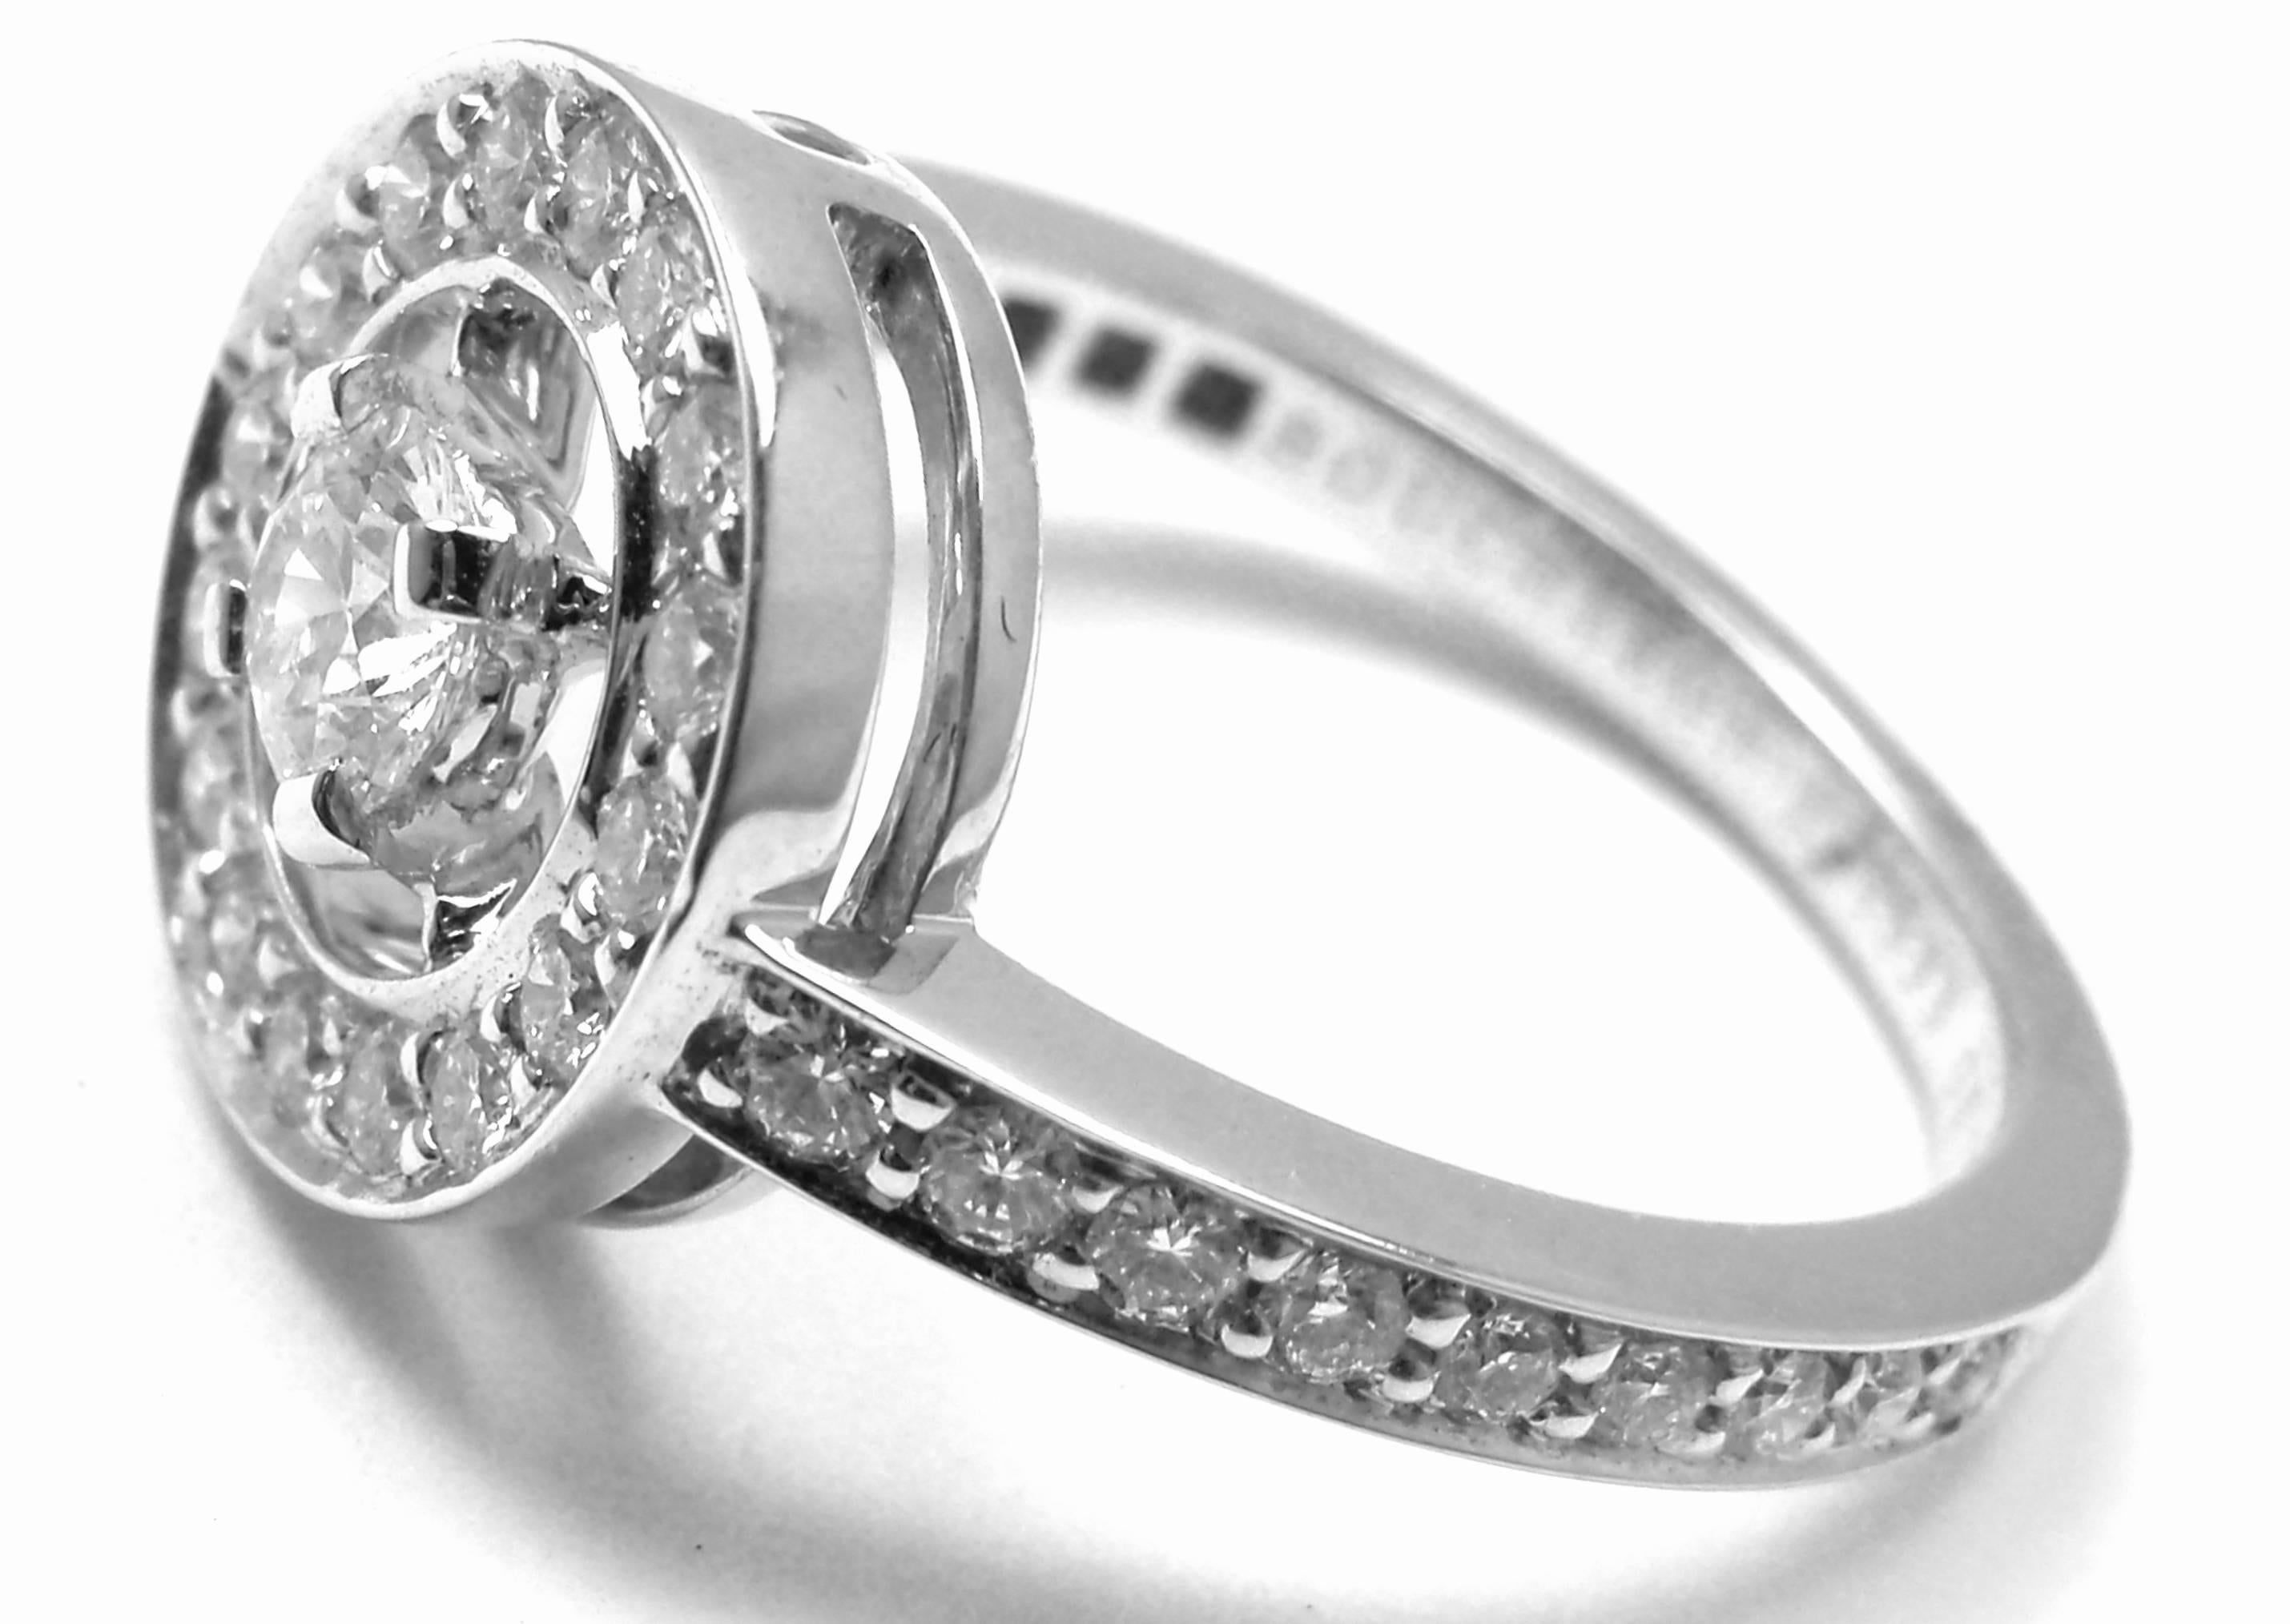 18k White Gold Diamond Ava Ring by Boucheron Paris. 
With 1 round brilliant cut diamond VS1 clarity G color total weight 0.25ct and 
34 round brilliant cut diamonds VS1 clarity, G color total weight approx. 0.44ct

Details:
Ring Size: European